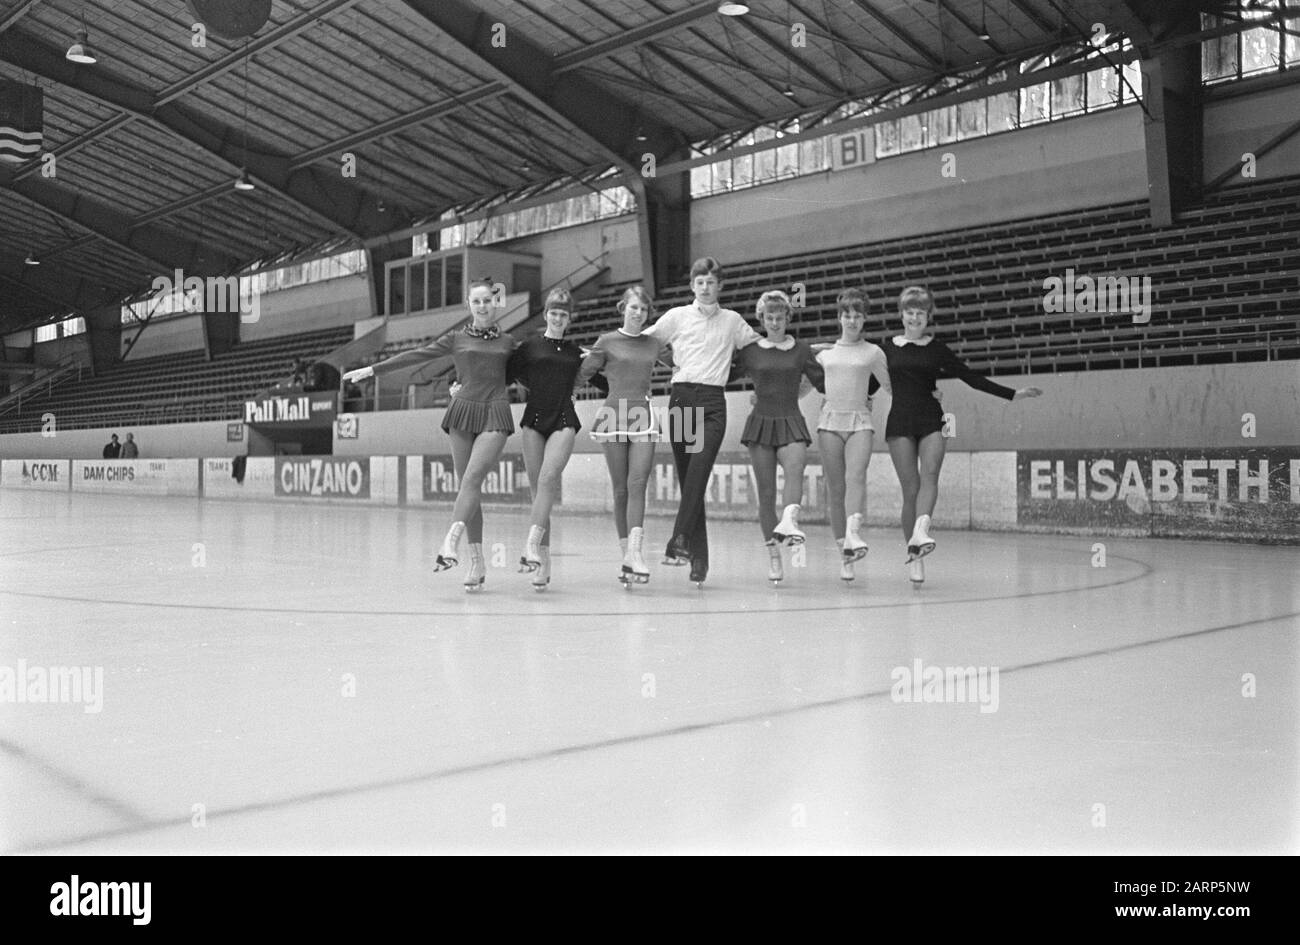 Dutch Figure Skating Championships 1967 at the Hokij (Houtrusthallen) in The Hague  V.l.n.r. the participants Anneke Heyt, Willy de Zoete, Marie Jouwstra, Arnoud Hendriks, Rieneke Zenijk, Anneke Roel and Astrid Feiertag Annotation: Arnoud Hendriks was the only male participant Date: March 15, 1967 Location: Den Haag, Zuid-Holland Keywords: ice dancing, figure skating, sport Person name: Feiertag, Astrid, Hendriks, Arnoud, Heyt, Anneke, Jouwstra, Marie, Roel, Anneke, Zeneke, Zoet, Willy de Stock Photo